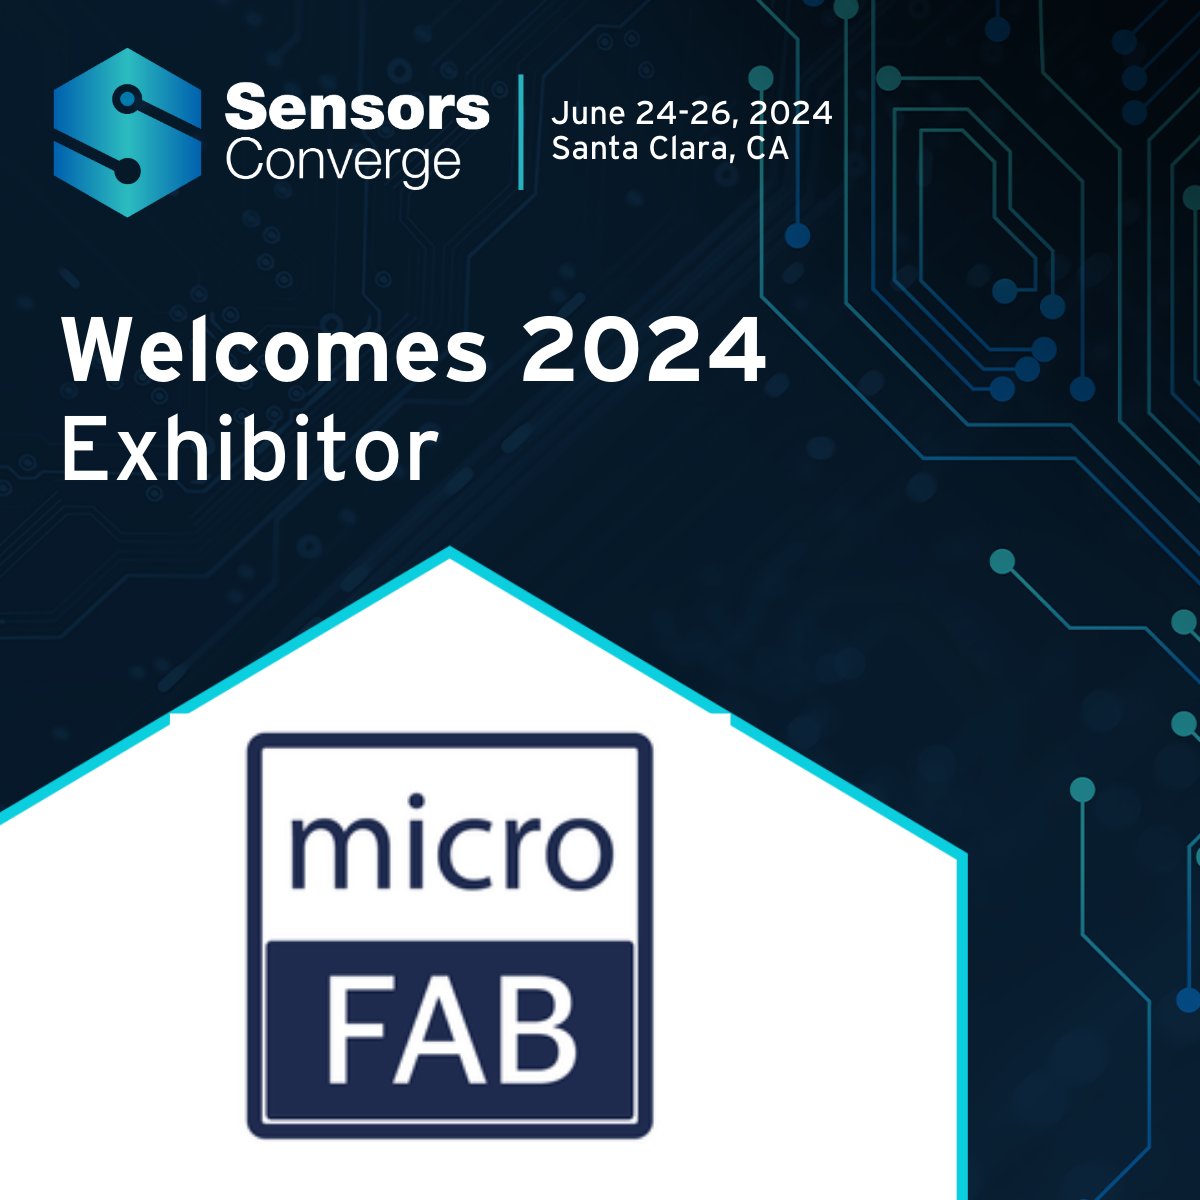 Welcome microfab to #SensorsConverge

microfab is an independent Service Provider in the field of silicon-based MEMS technology and a global supplier of customized and self-developed Microsystems. microfab.de

June 24-26 in Santa Clara sensorsconverge.com/sensorsconverg…